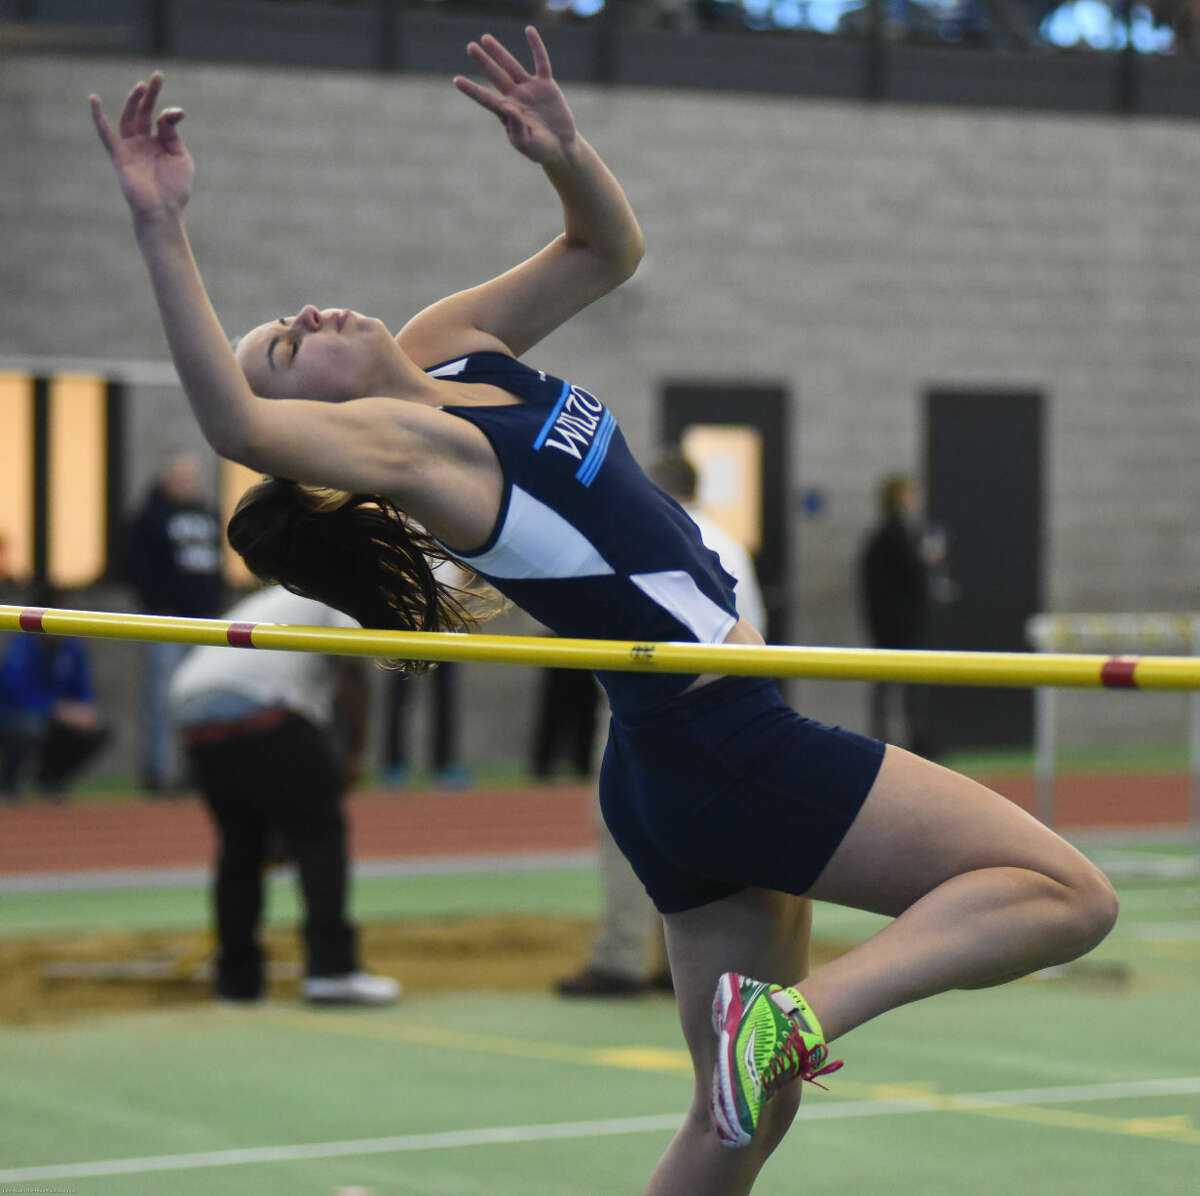 Hour photo/John Nash - Action from the Class L Track Championship meet.